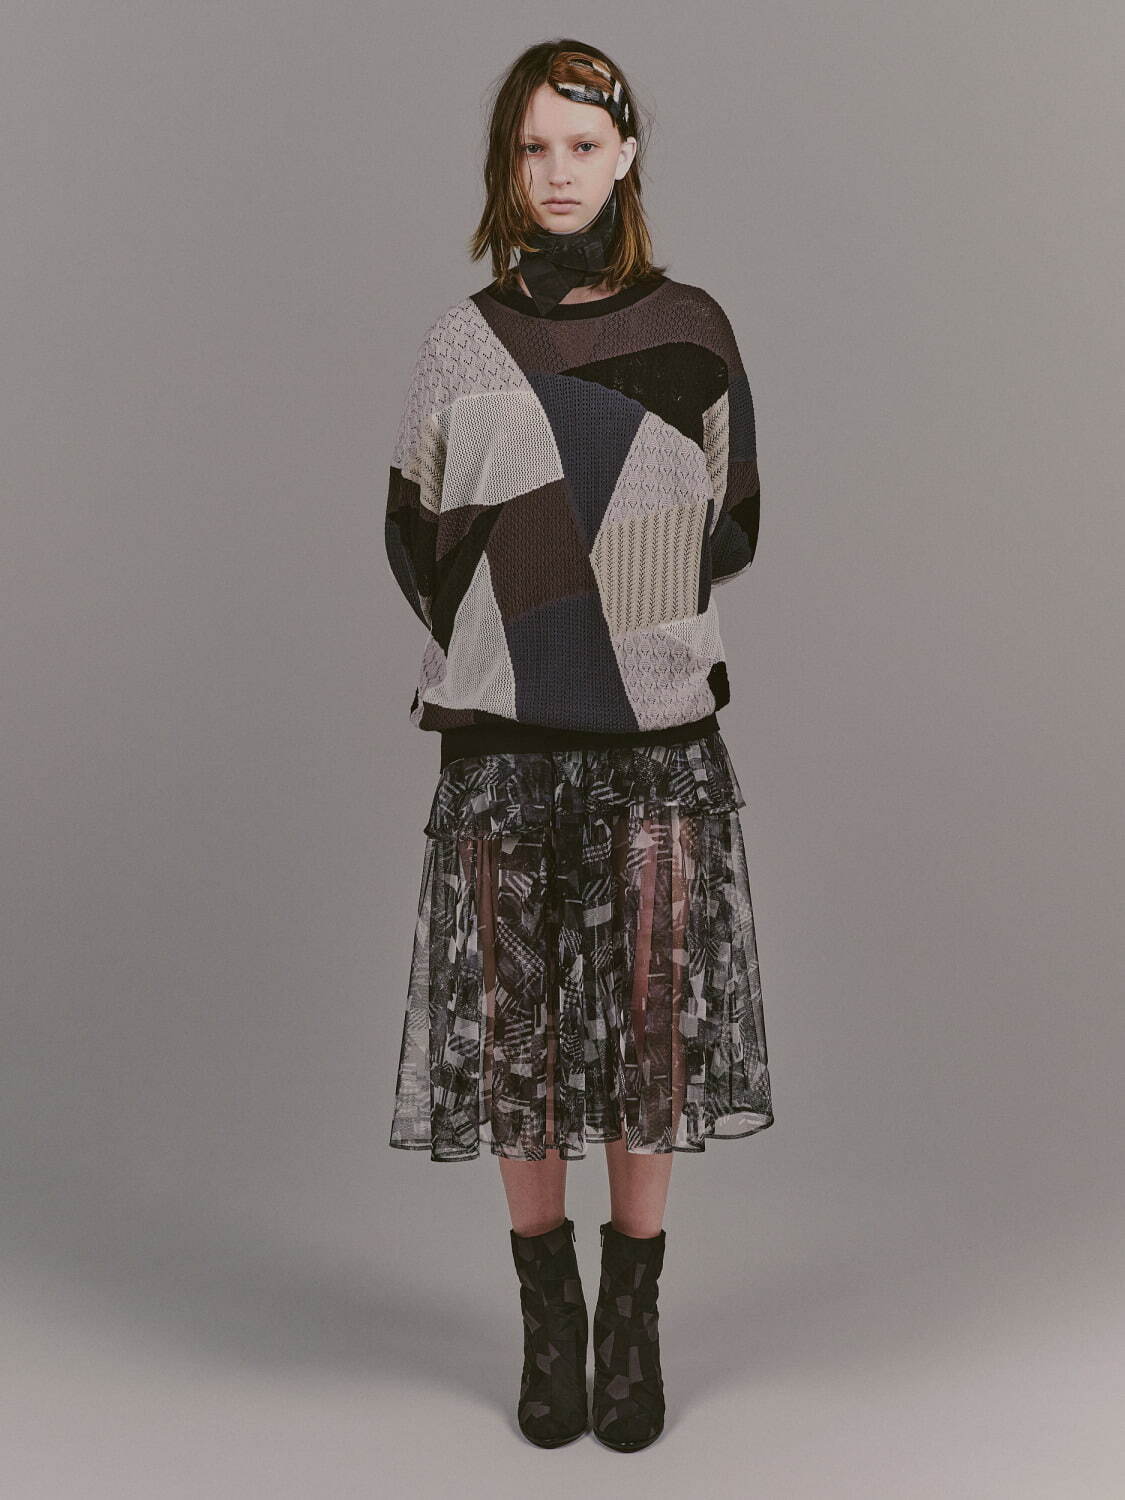 MULTIPLE PATCHWORK PULLOVER KNIT 50,600円
PATCHWORK PRINT TULLE DRESS 74,800円
PATCHWORK BOOTS 104,500円